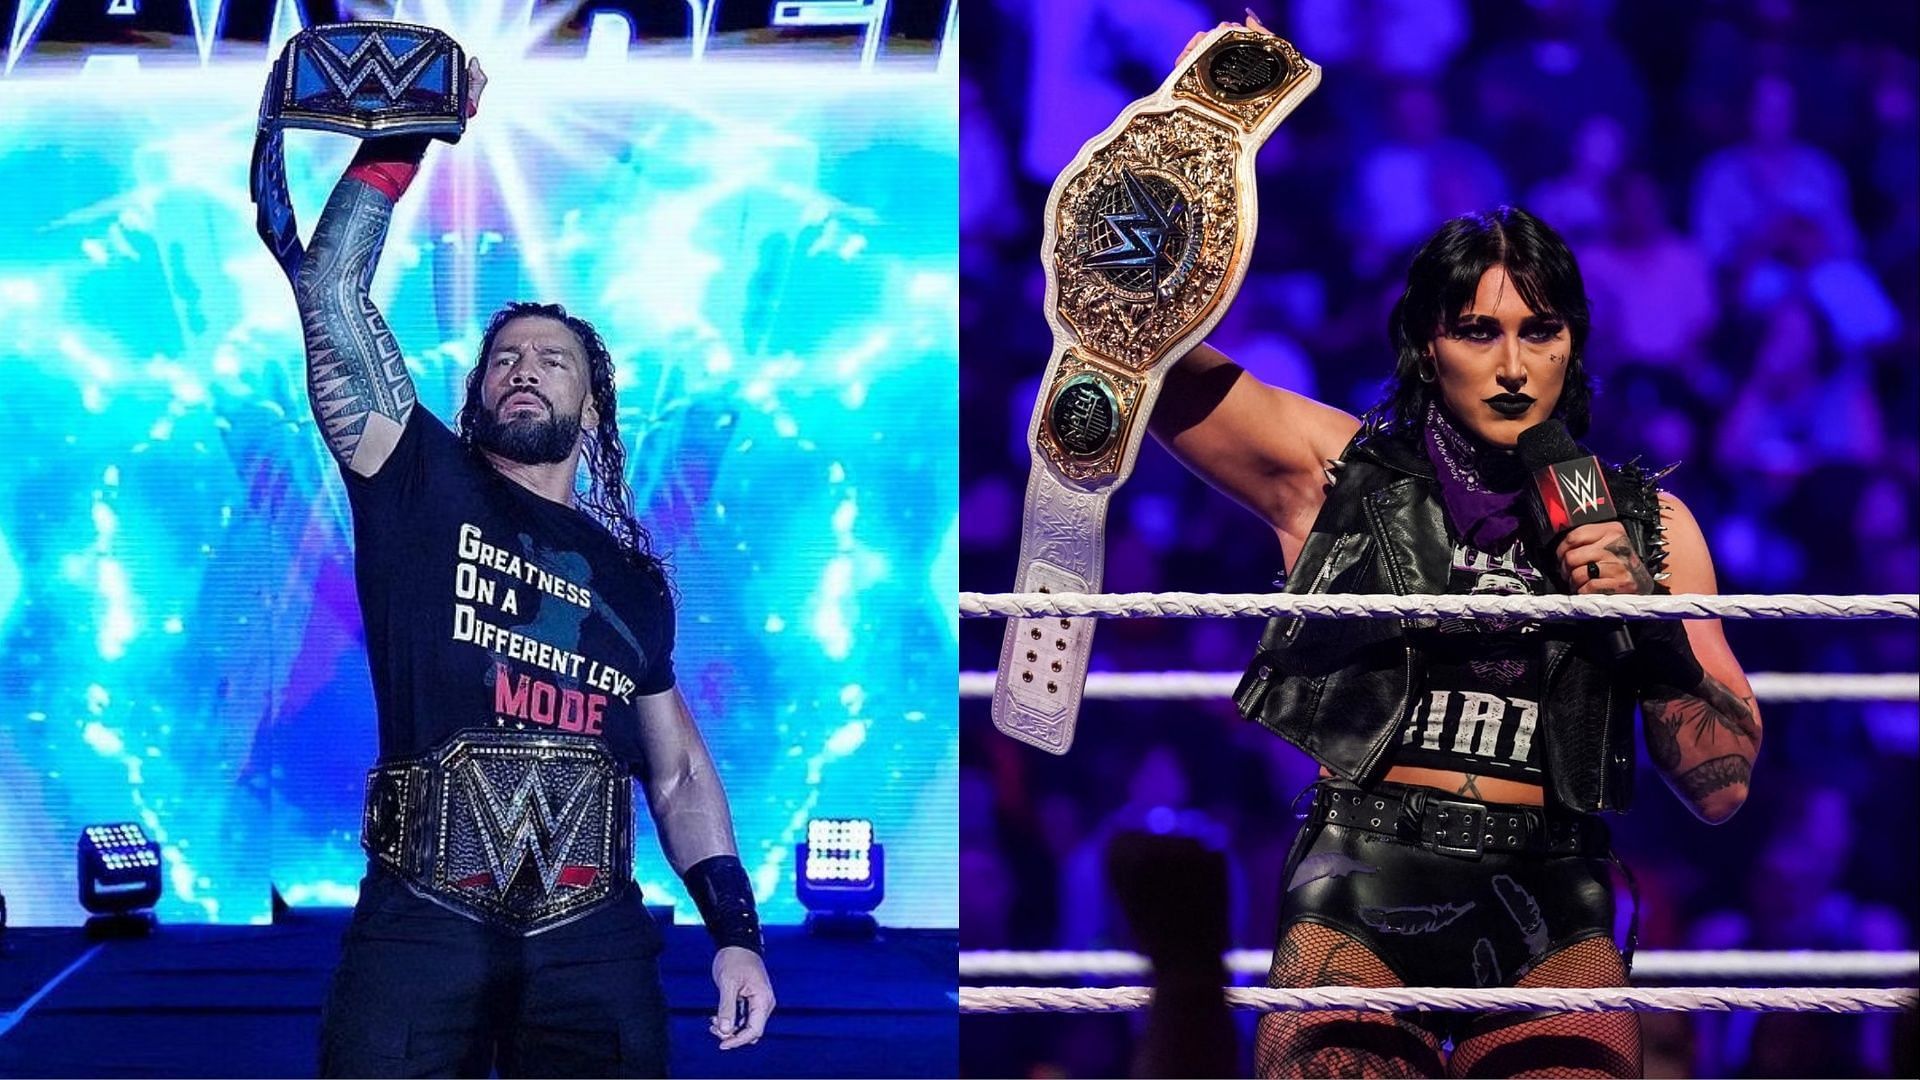 Roman Reigns and Rhea Ripley have yet to meet one-on-one on SmackDown.